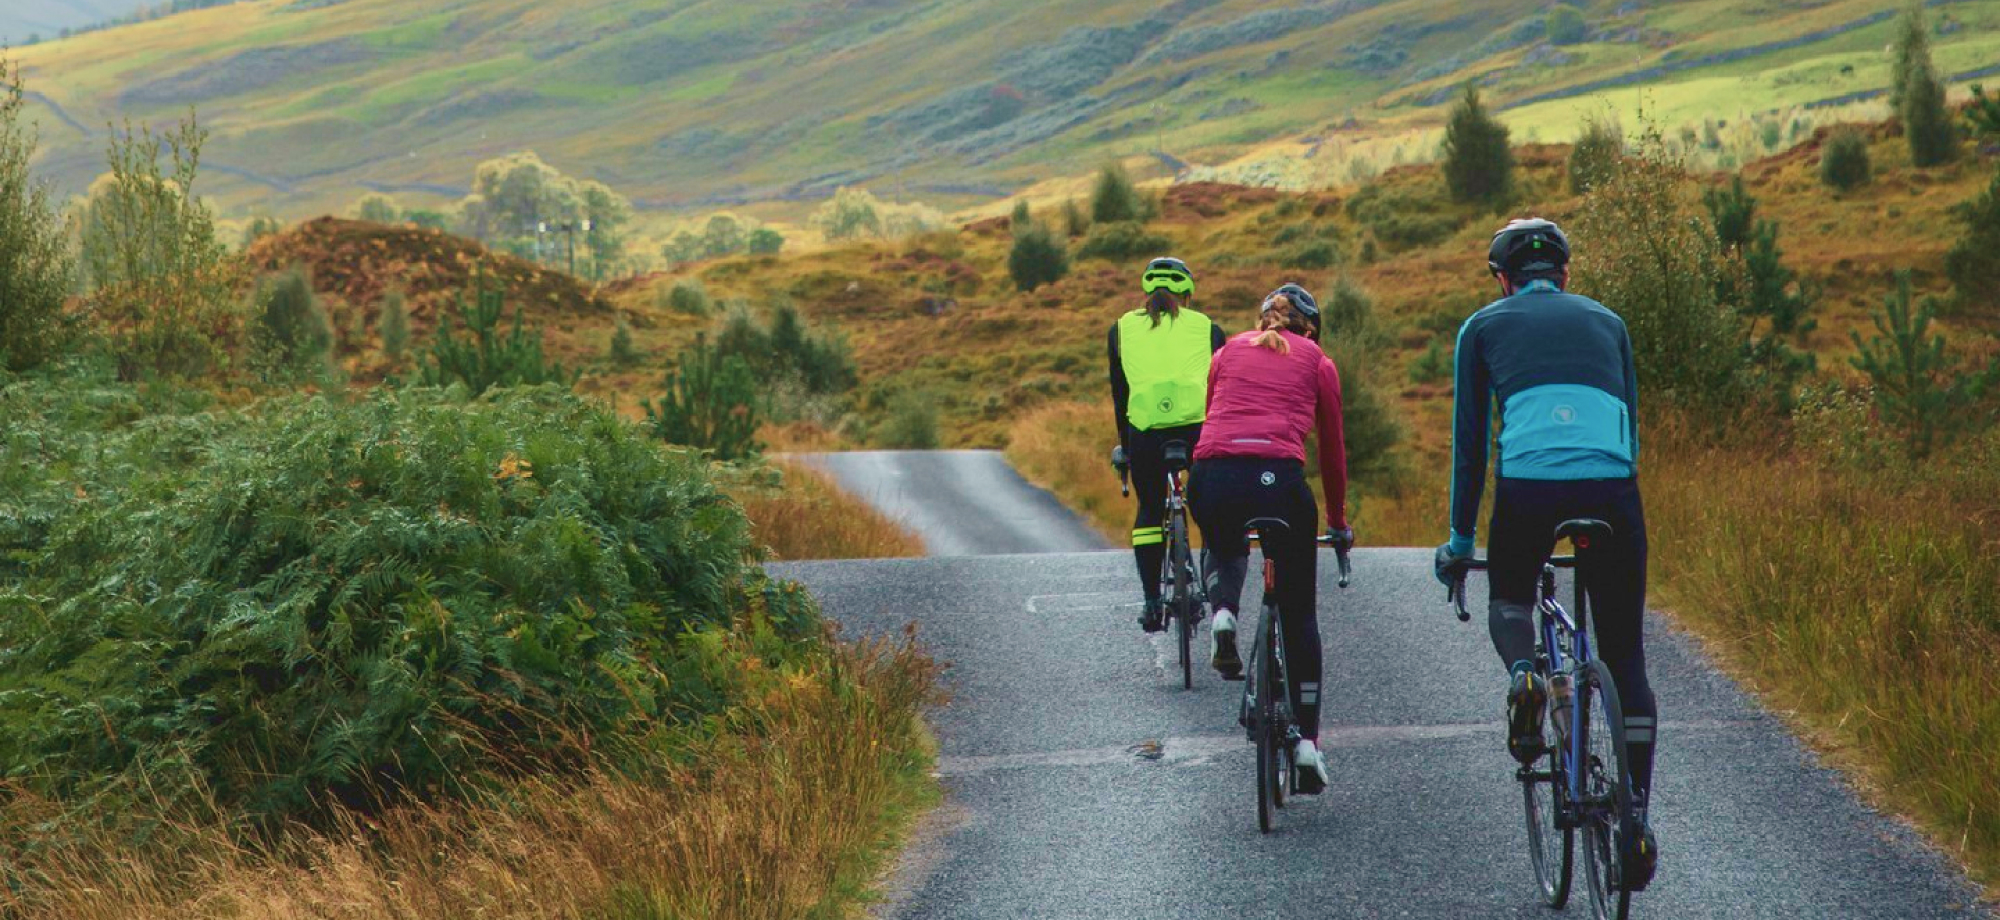 Merino Wool Top Picks - cyclists on road in cold weather clothing